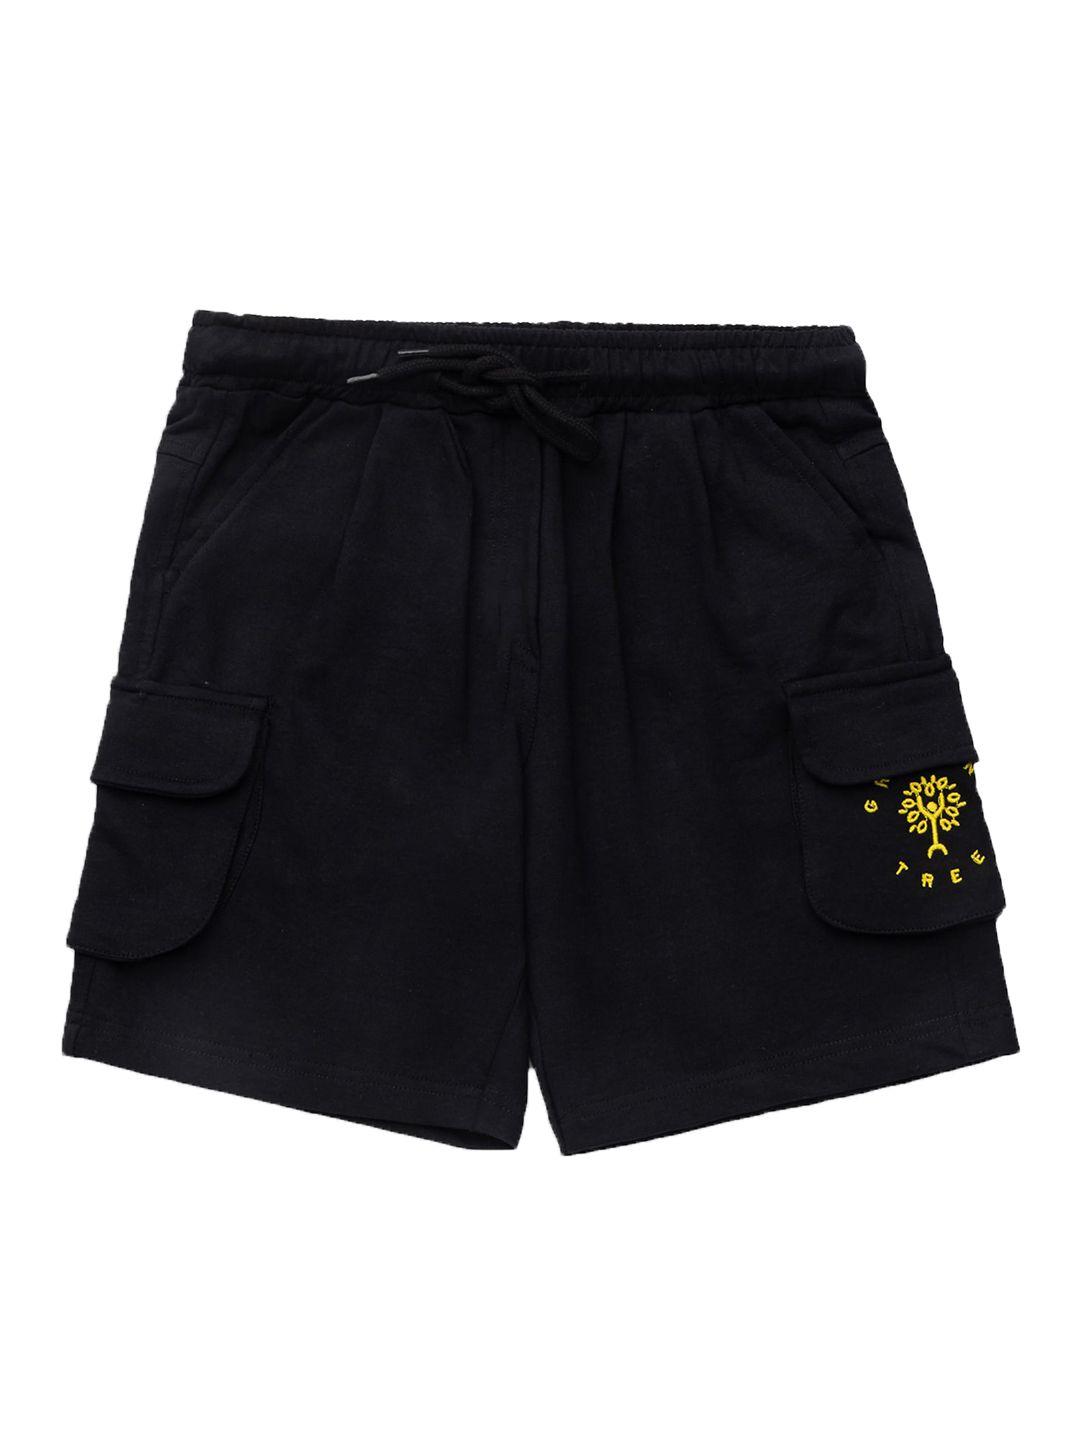 growing tree unisex kids black outdoor antimicrobial technology shorts